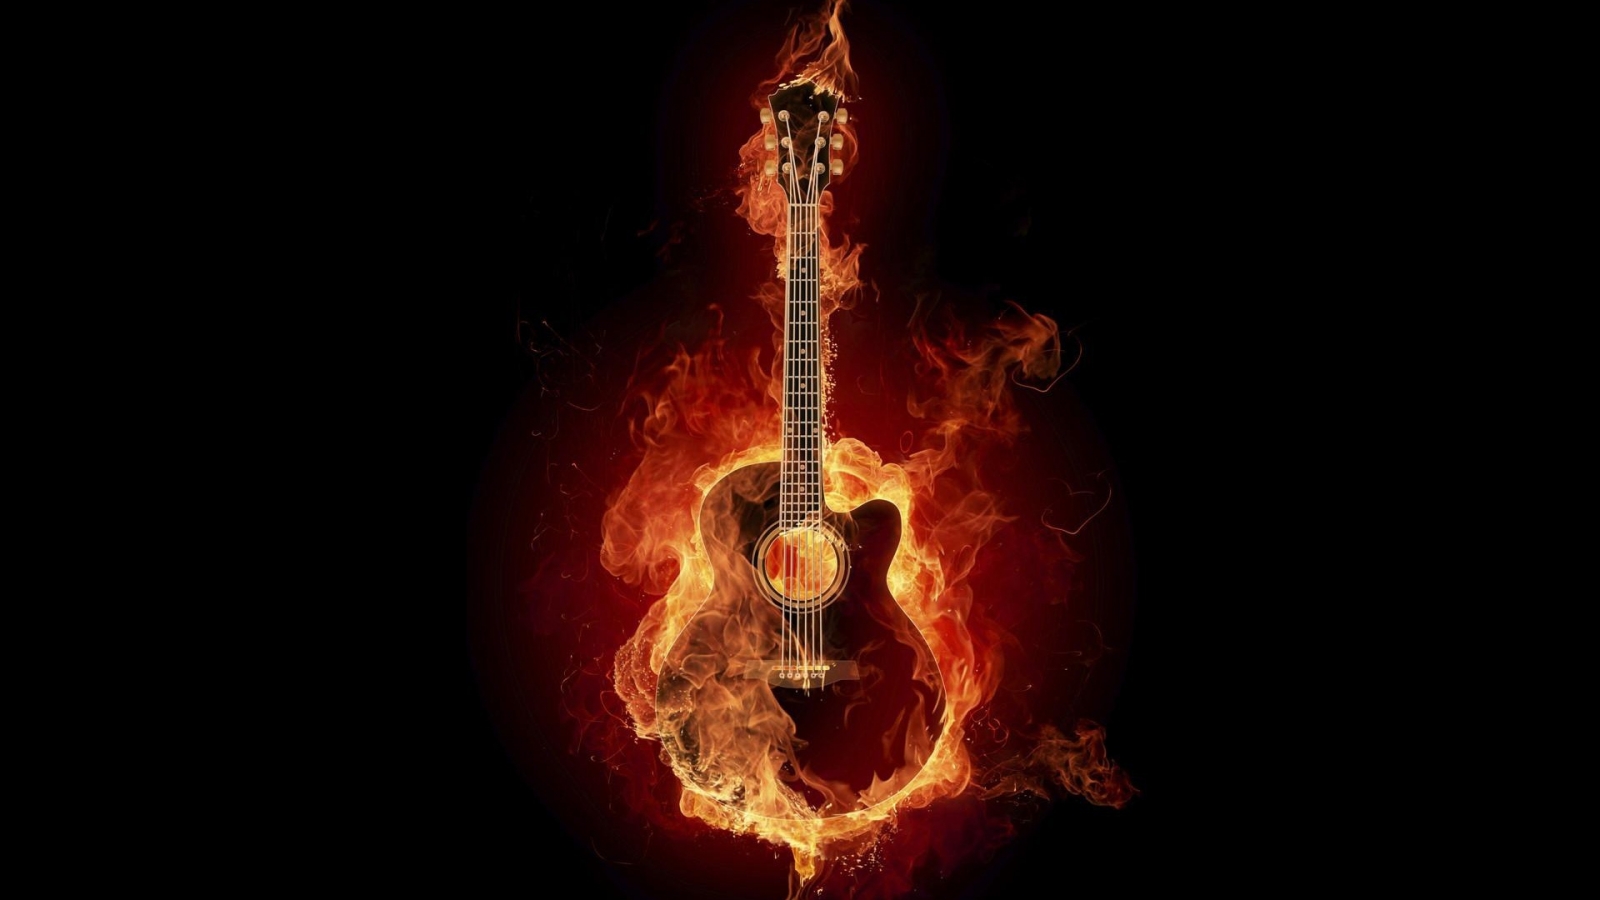 Great Fire Guitar for 1600 x 900 HDTV resolution